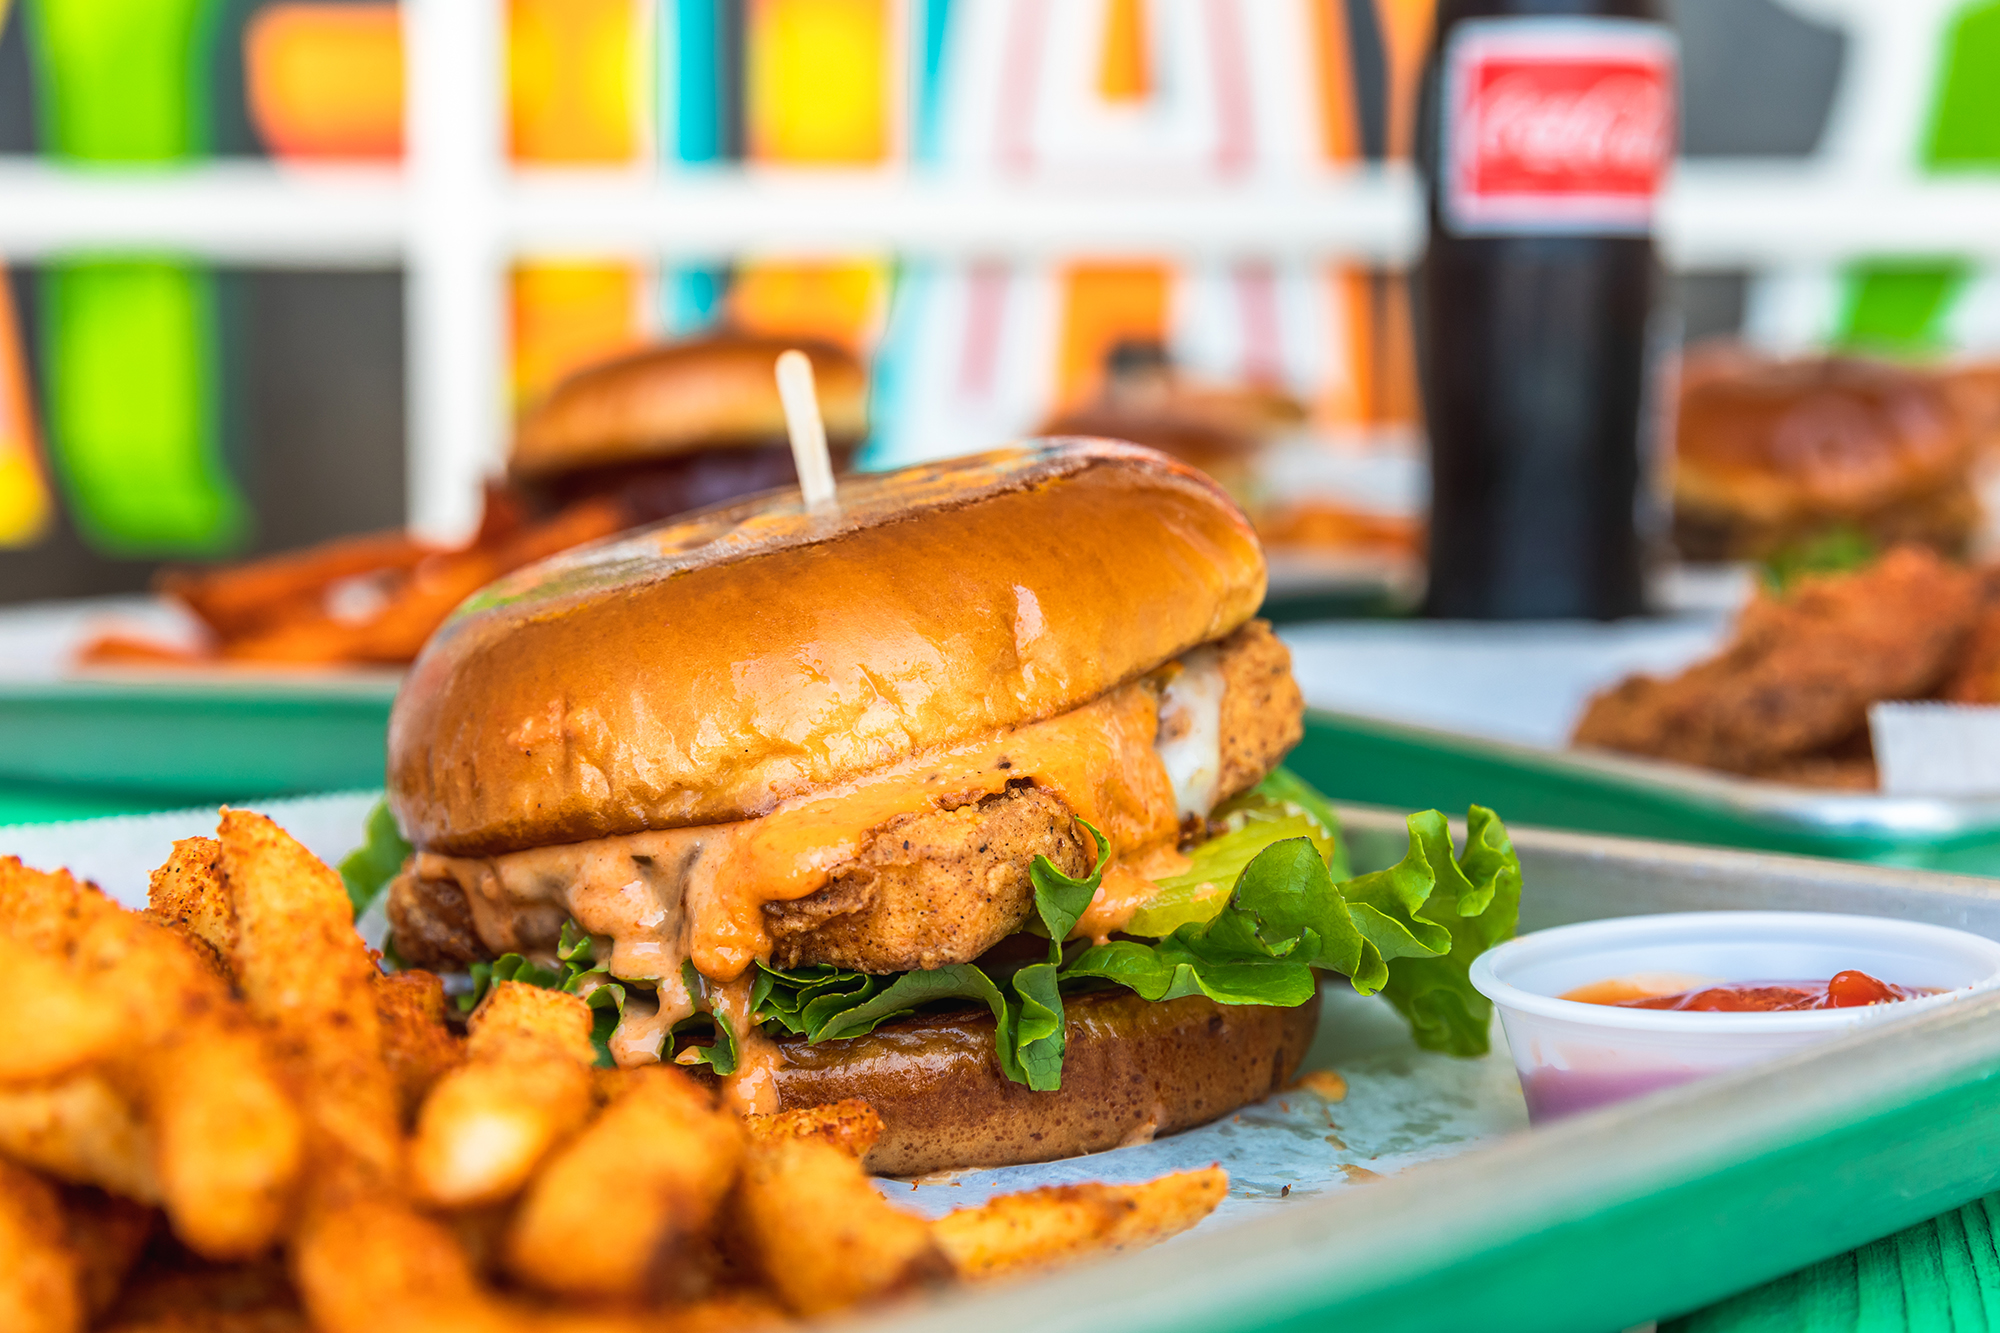 The Paneer Burger, with spicy fried paneer